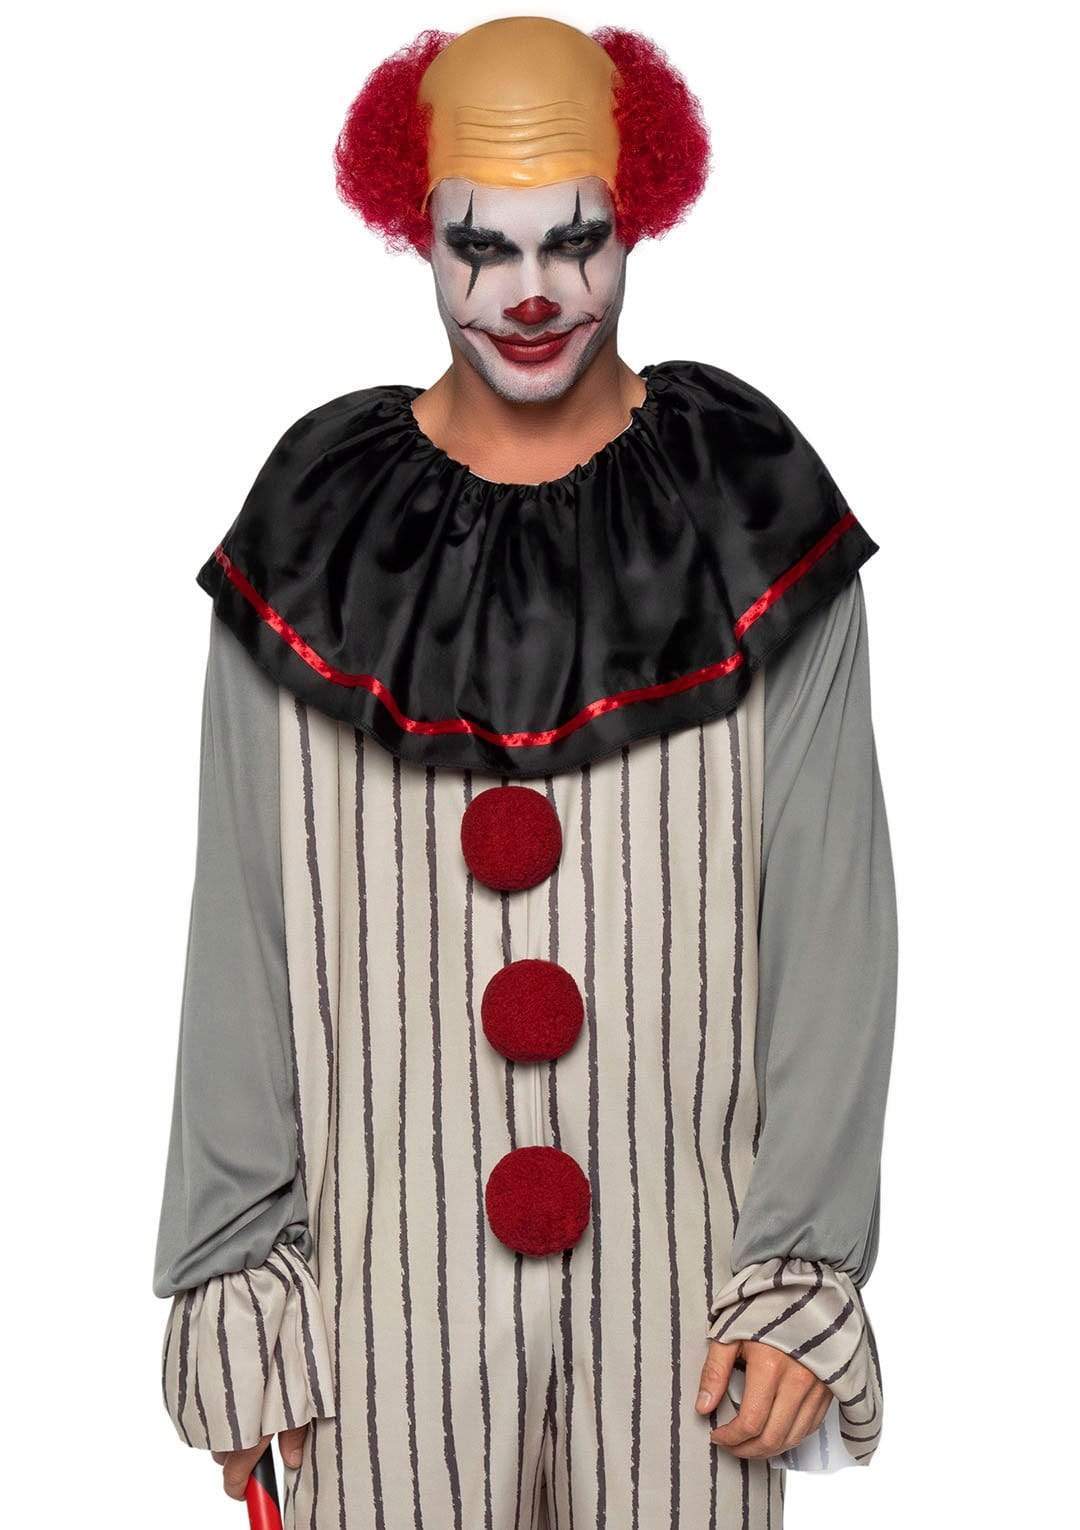 Creepy Clown Striped Jumpsuit with Pom-Pom accents and Clown Wig